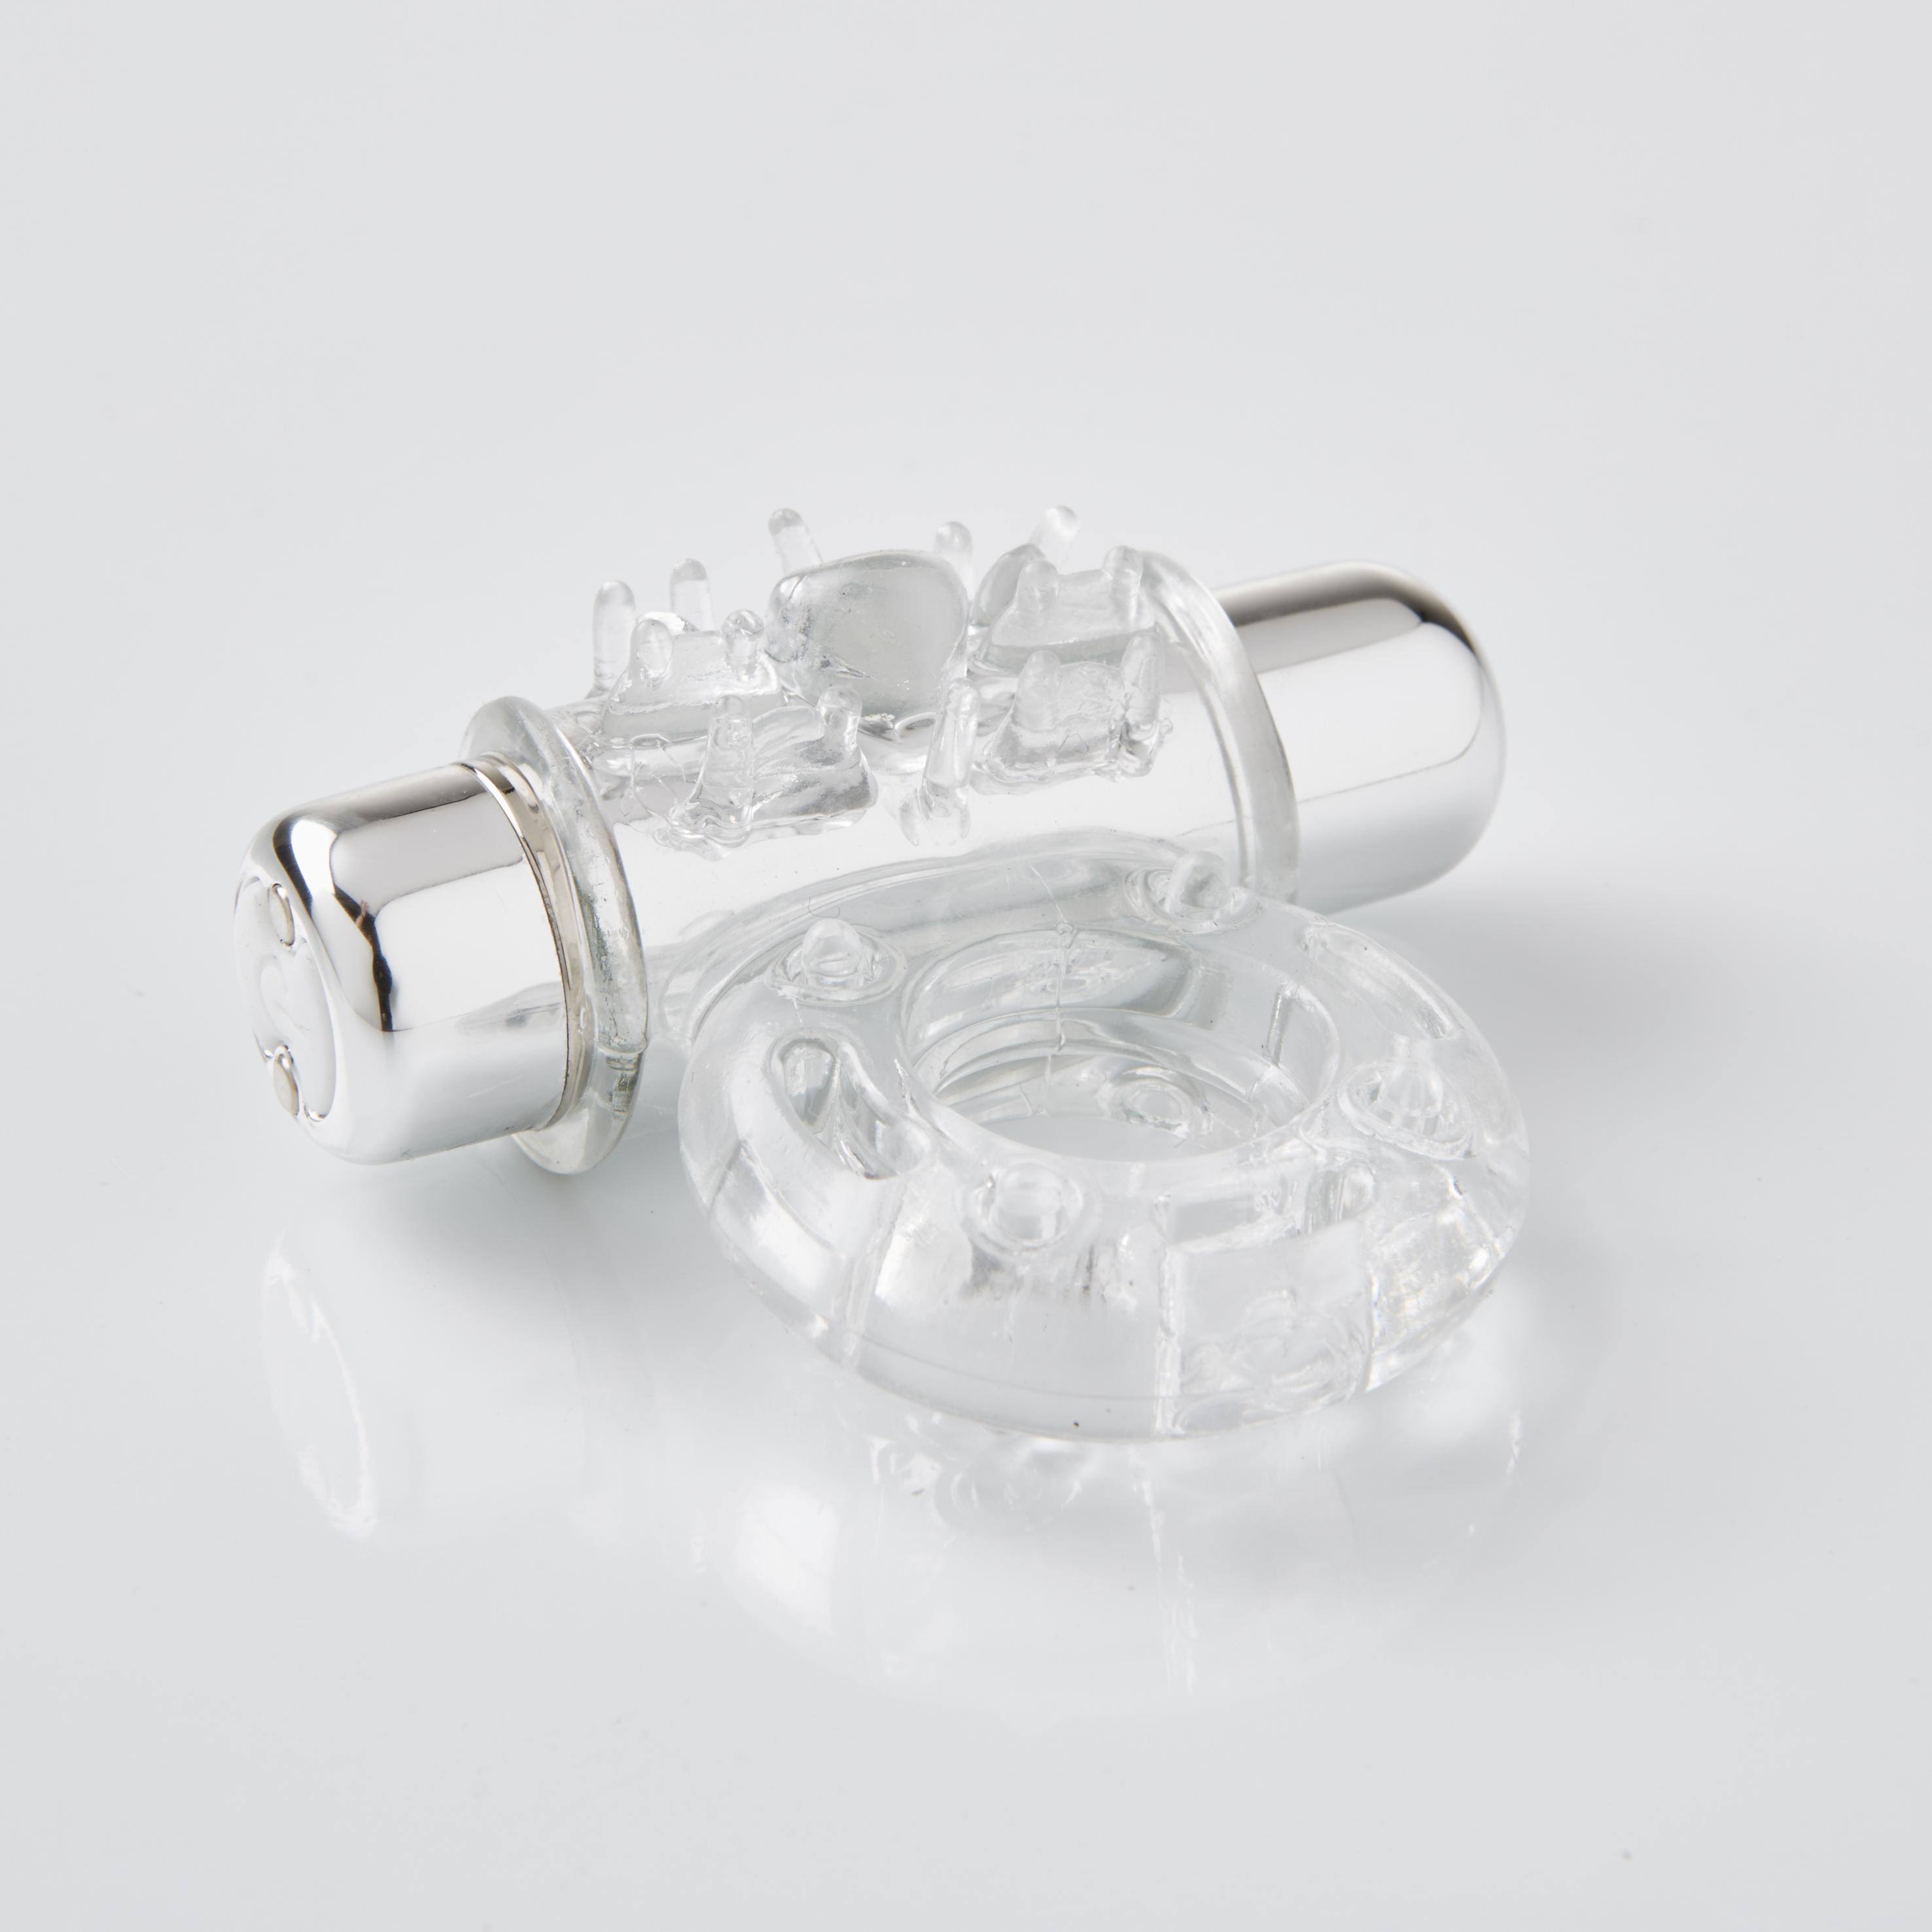 Sensuelle 7 Function Rechargeable Bullet Cock Ring Sex Toy - Clear